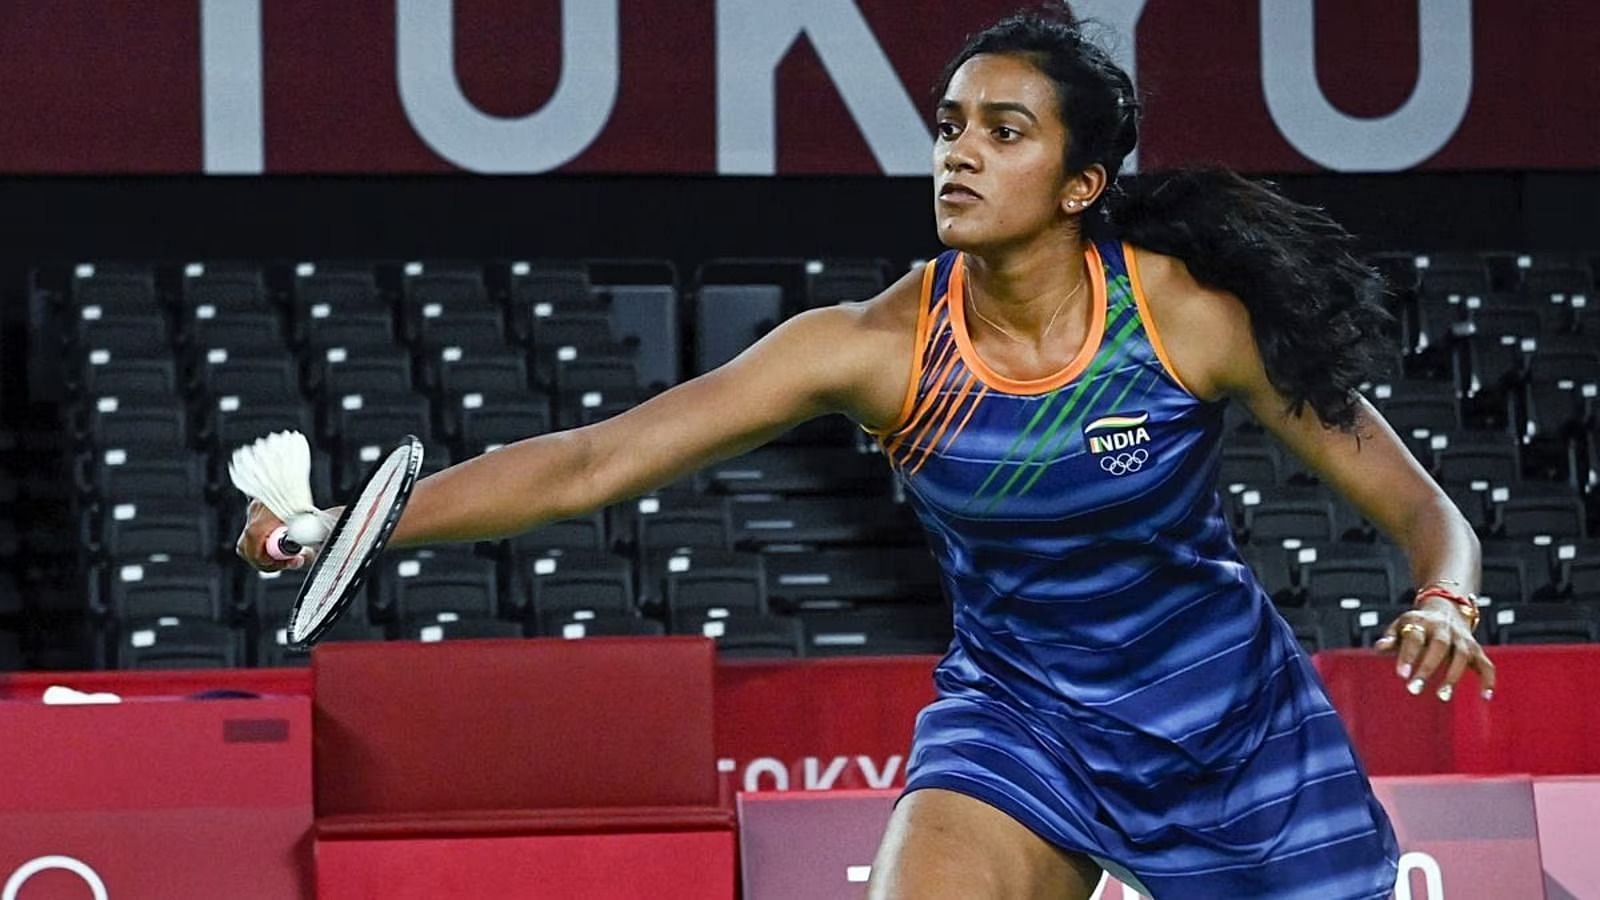 PV Sindhu will lead the charge for the women&#039;s singles Lakshya Sen will be a part of the men&#039;s singles team at the Asian Games Sikki Reddy and Rohan Kapoor will represent India in the mixed doubles category at the Asian Games.